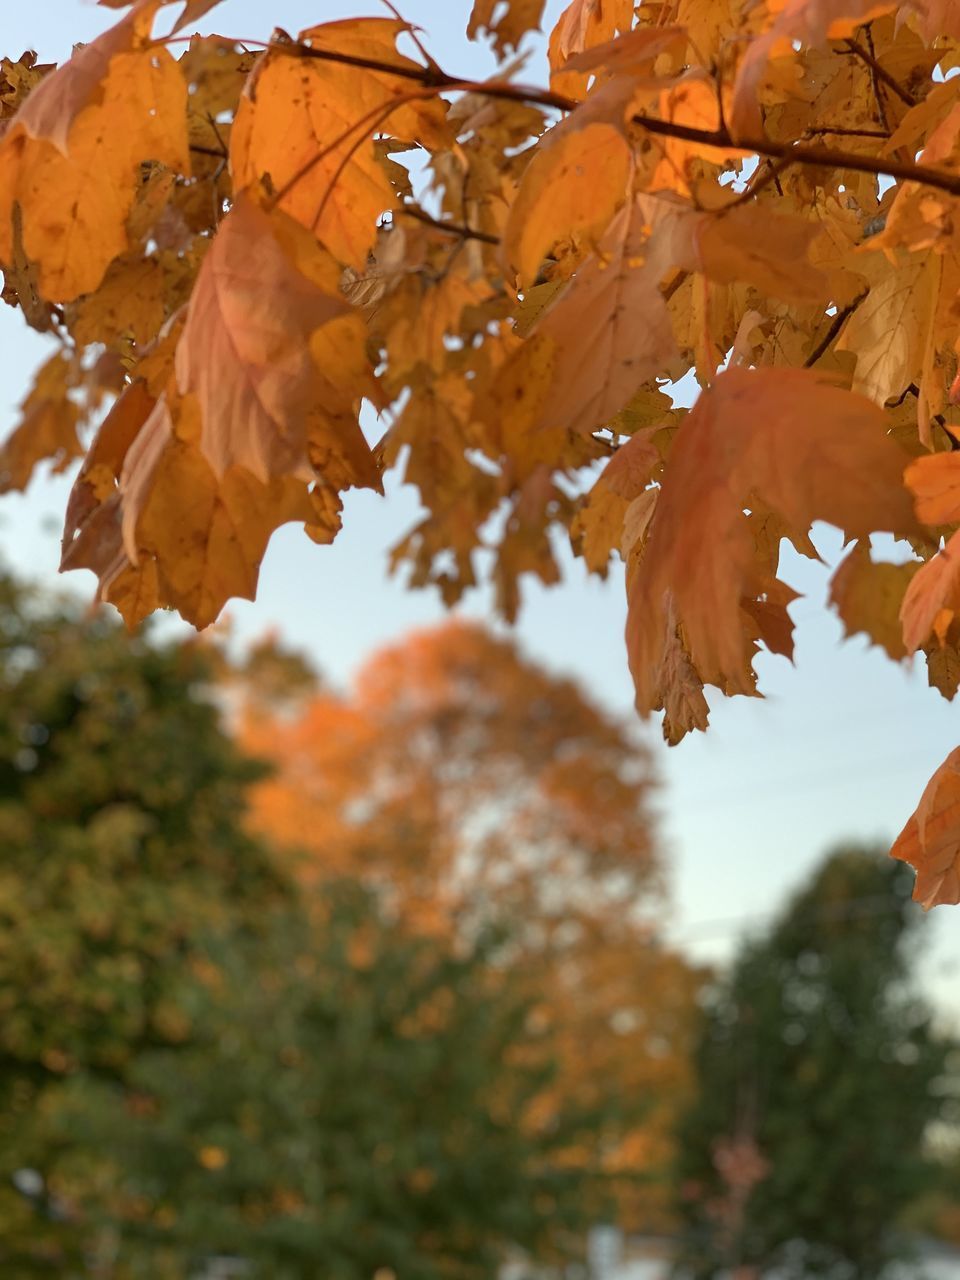 LOW ANGLE VIEW OF AUTUMNAL LEAVES AGAINST TREES